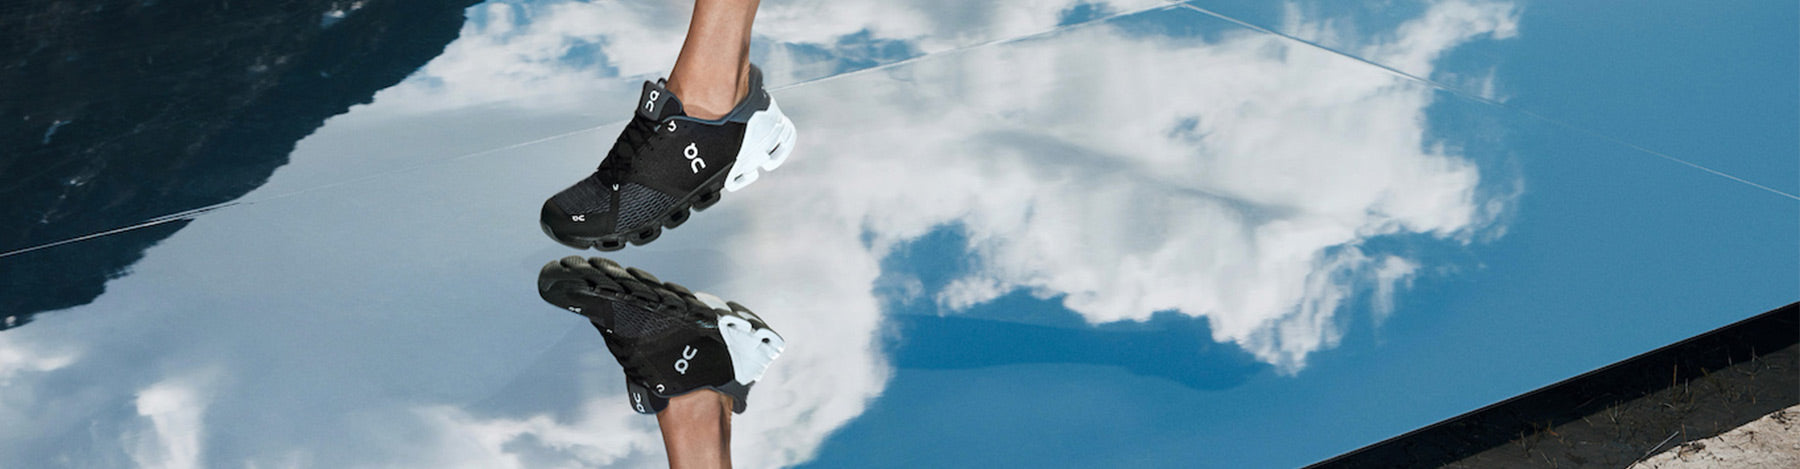 Man running in black and white On Cloudflyer running shoes on a reflective surface showing a blue sky with white clouds.